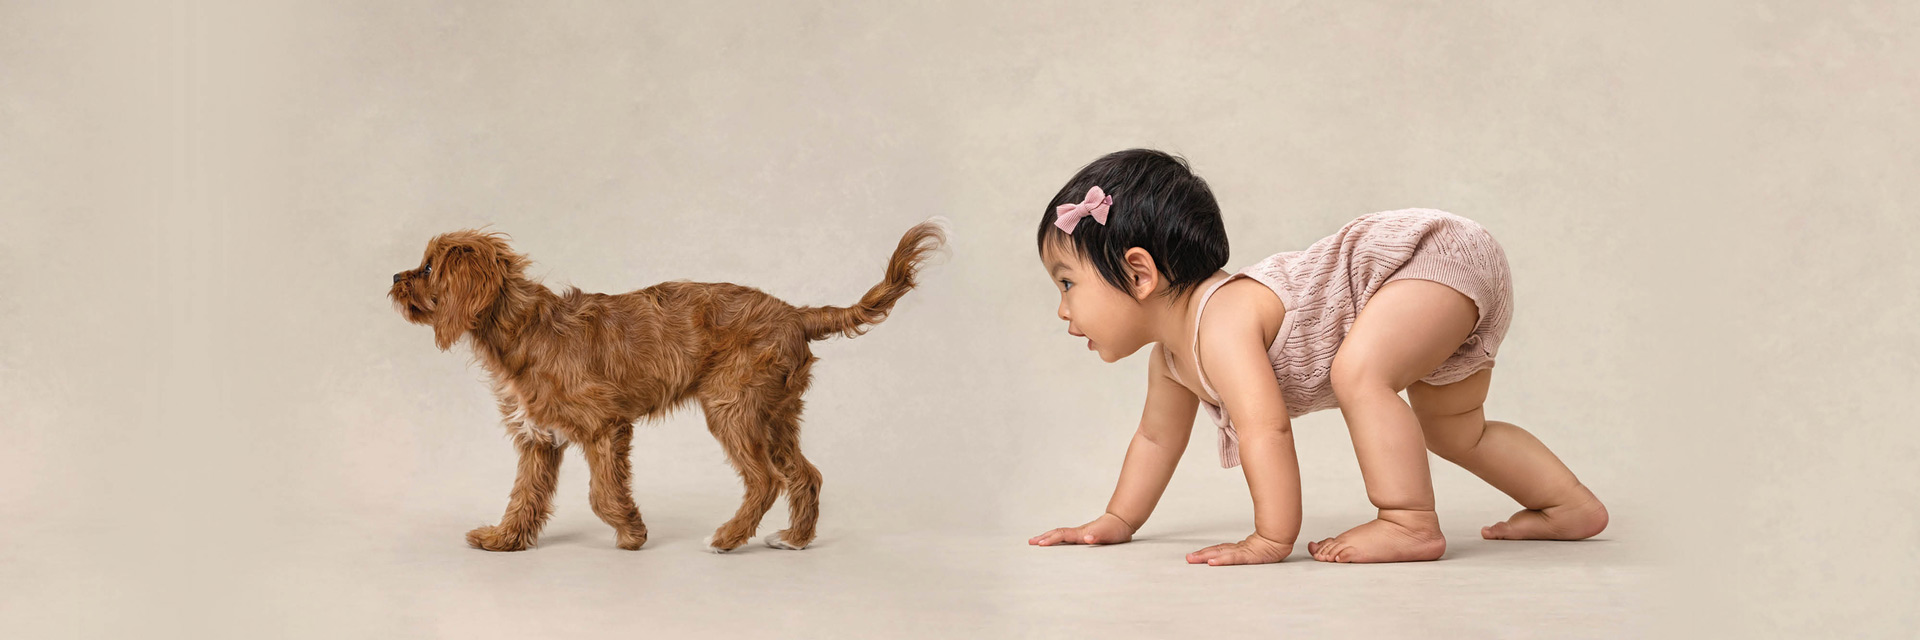 a baby crawling on the ground next to a dog